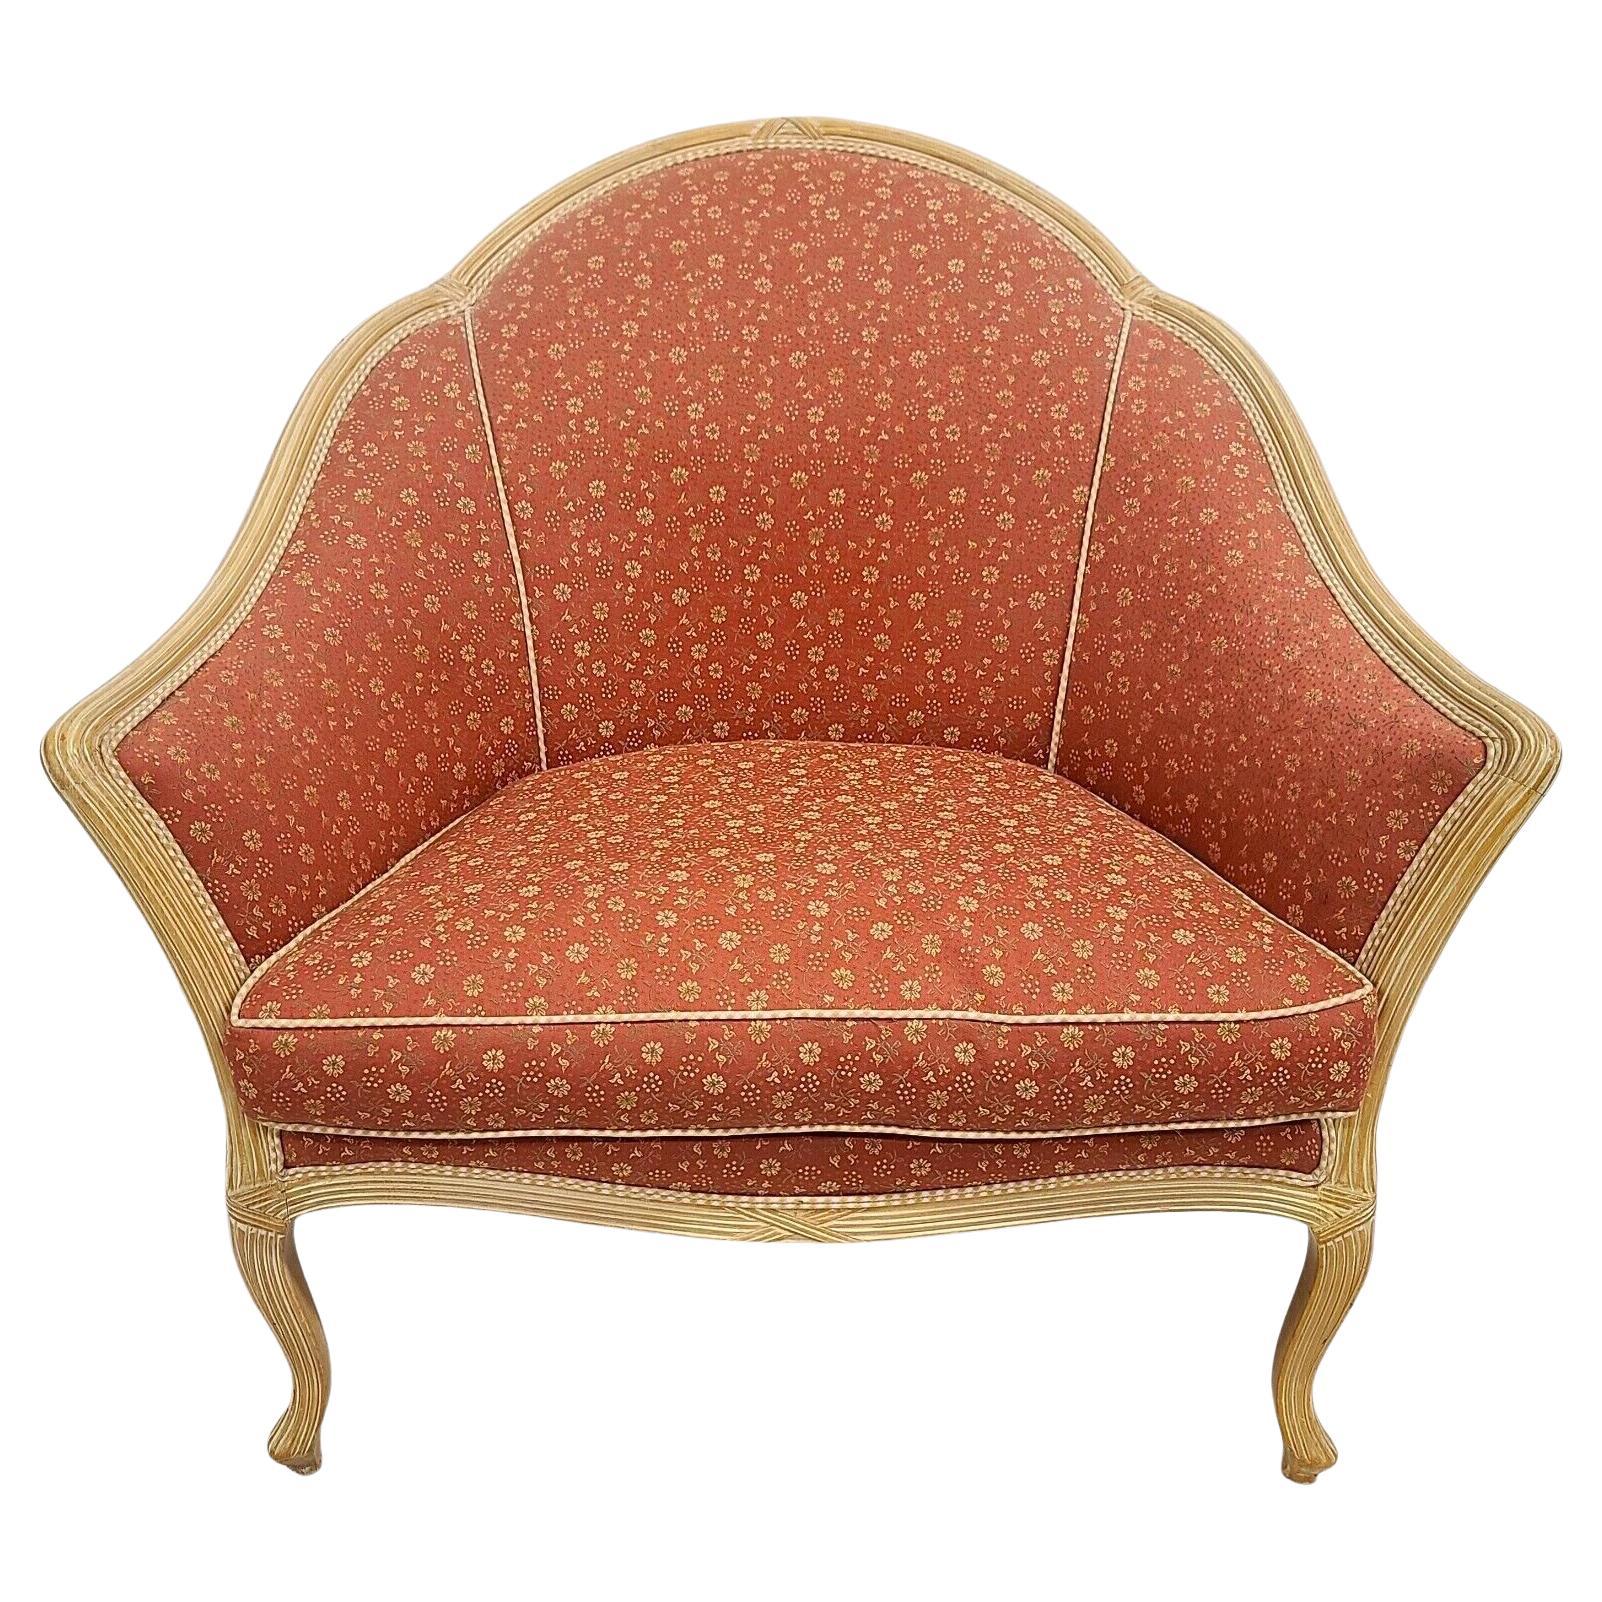 Custom Designer French Provincial Louis XV Floral Apricot Settee Chair For Sale